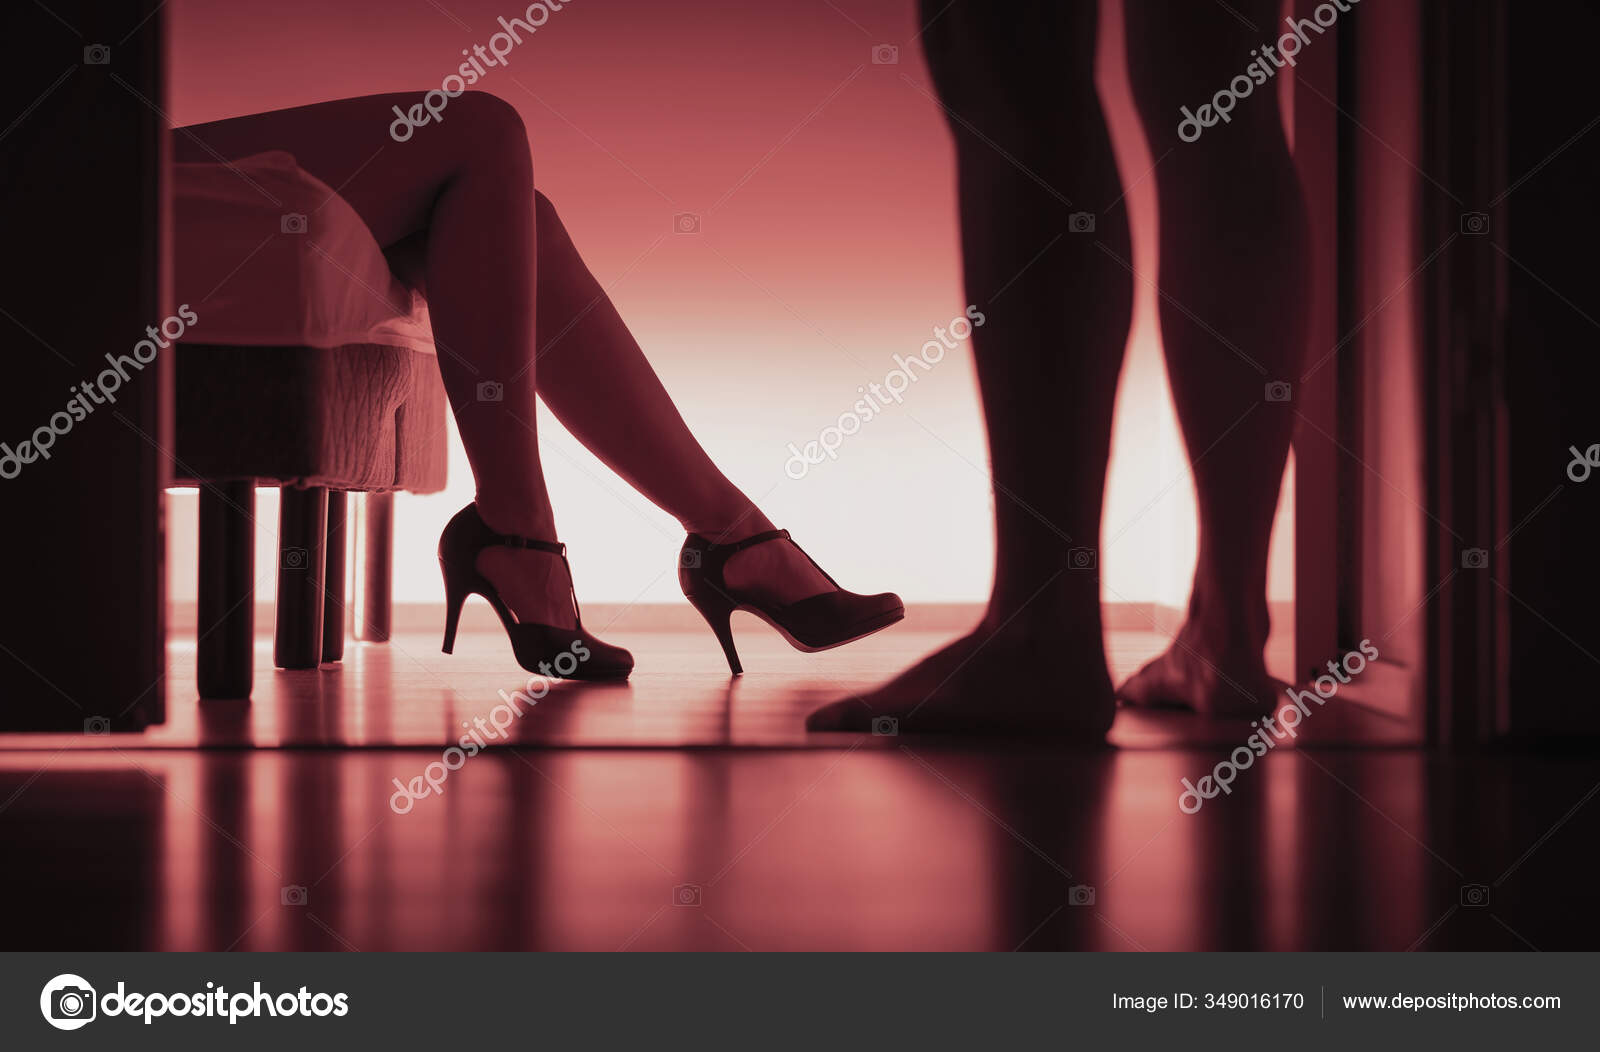 Escort Paid Sex Prostitution Sexy Woman Man Silhouette Bedroom Rape Stock Photo by ©terovesalainen 349016170 image